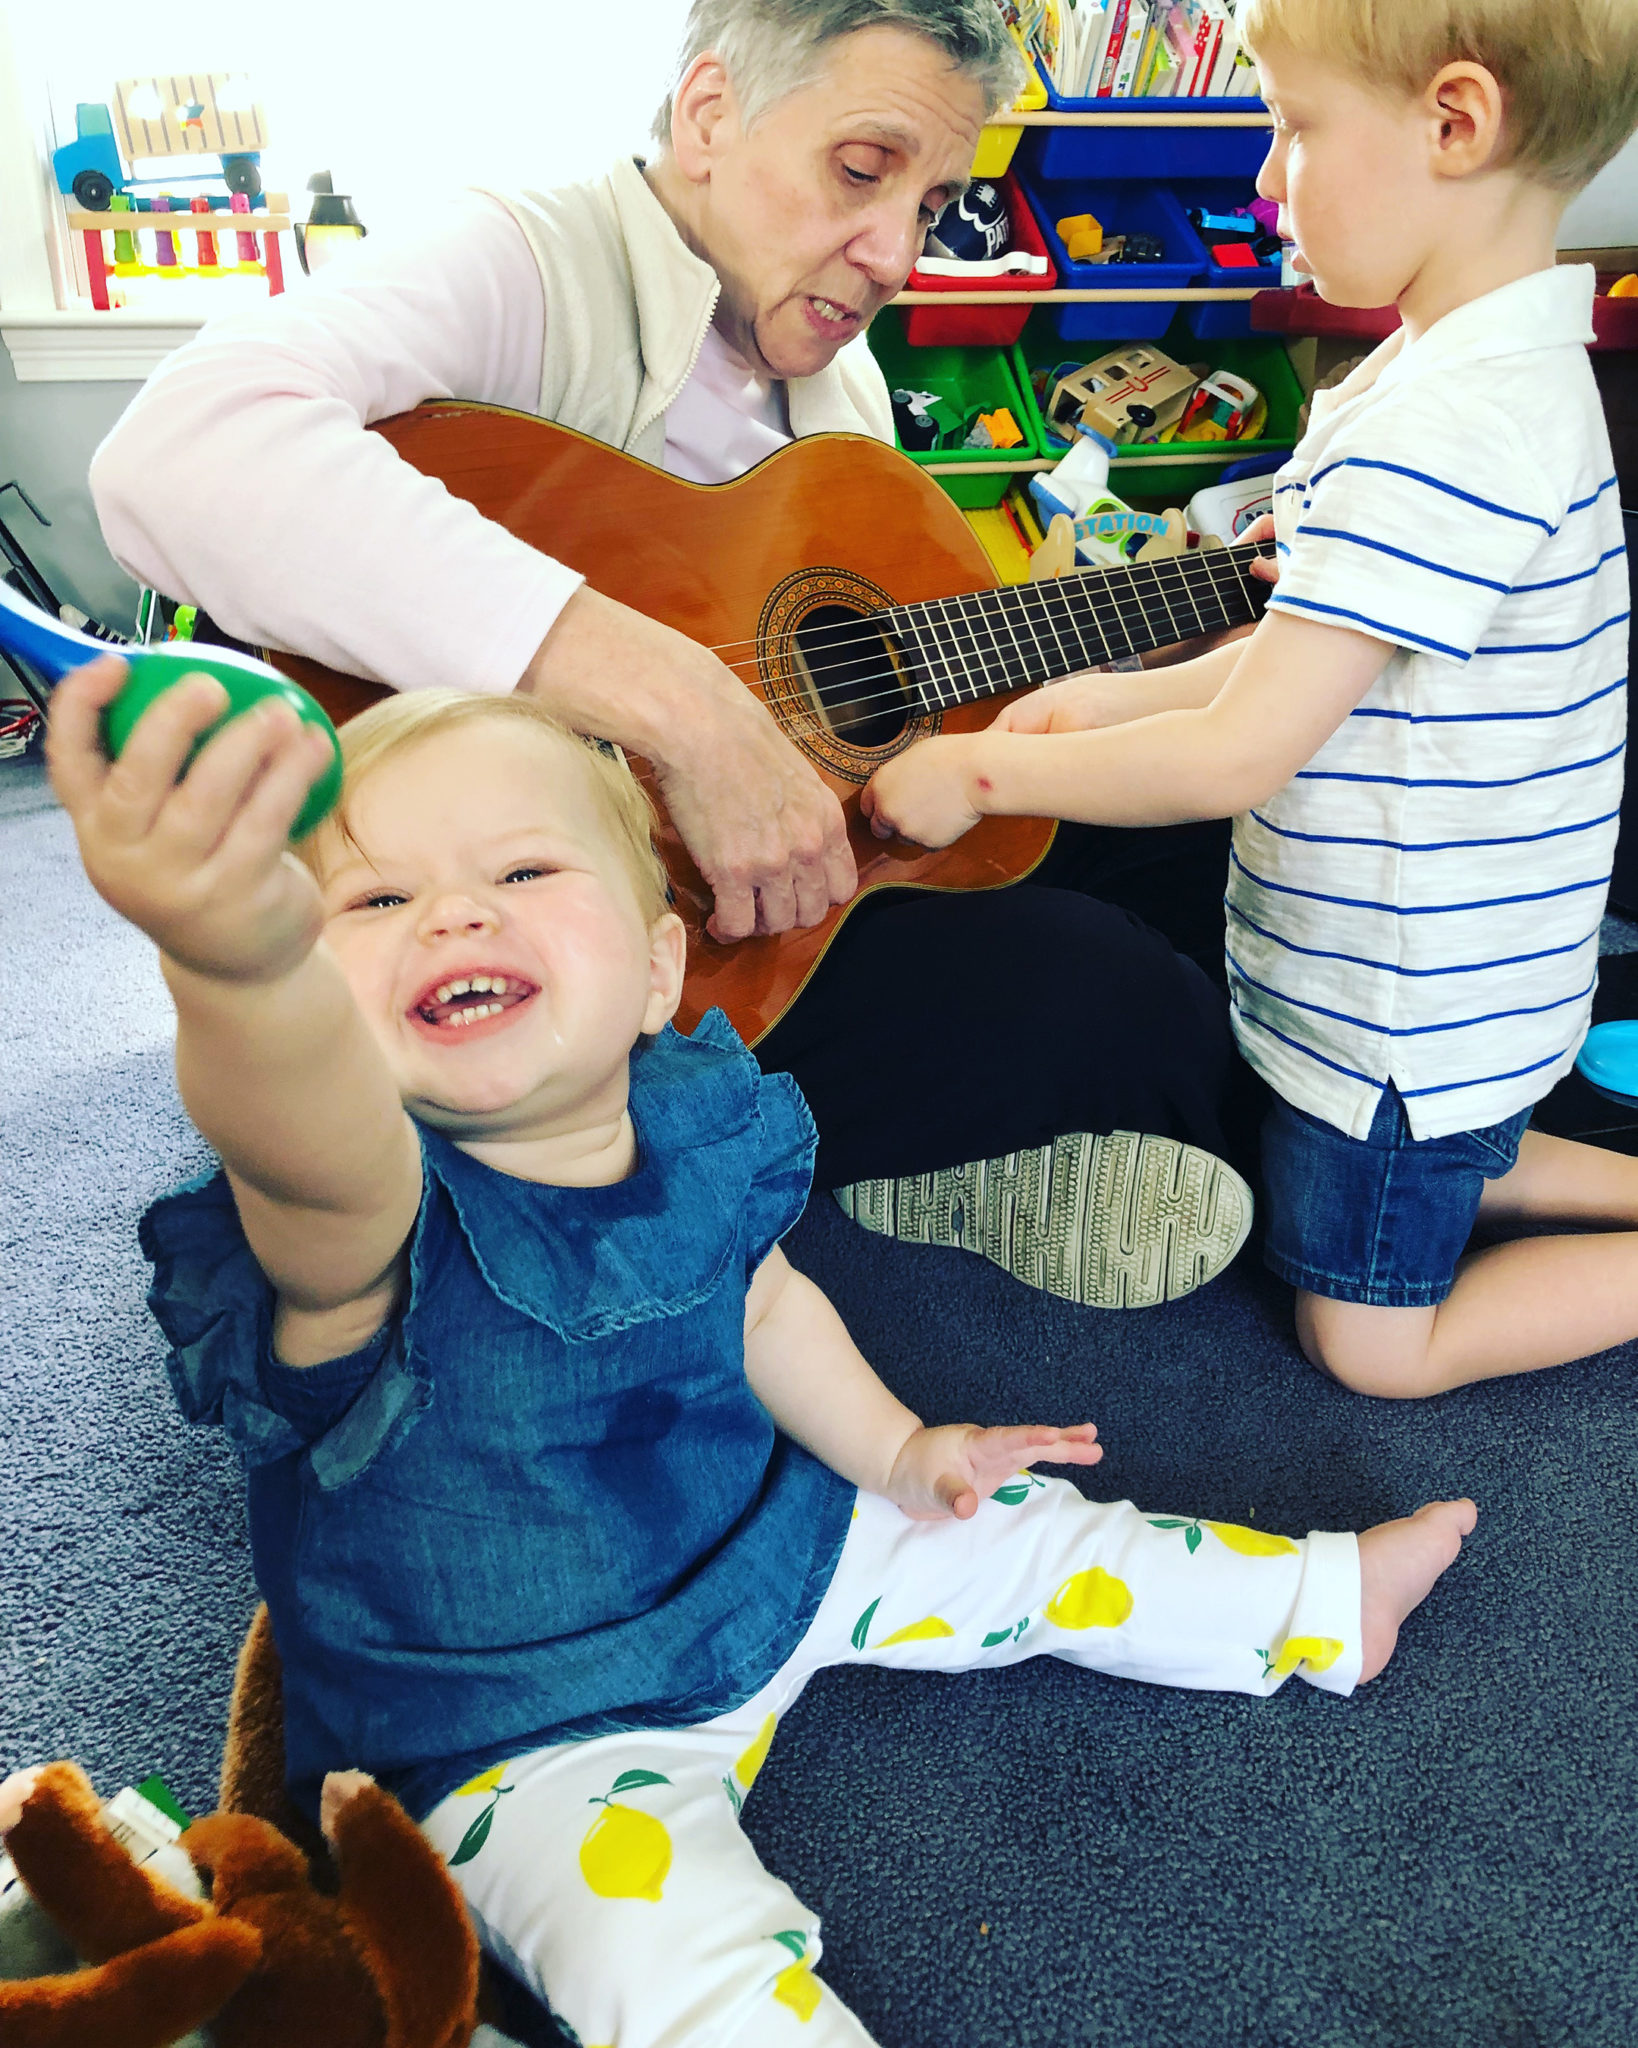 baby smiles and toddler is interested in guitar played by older woman